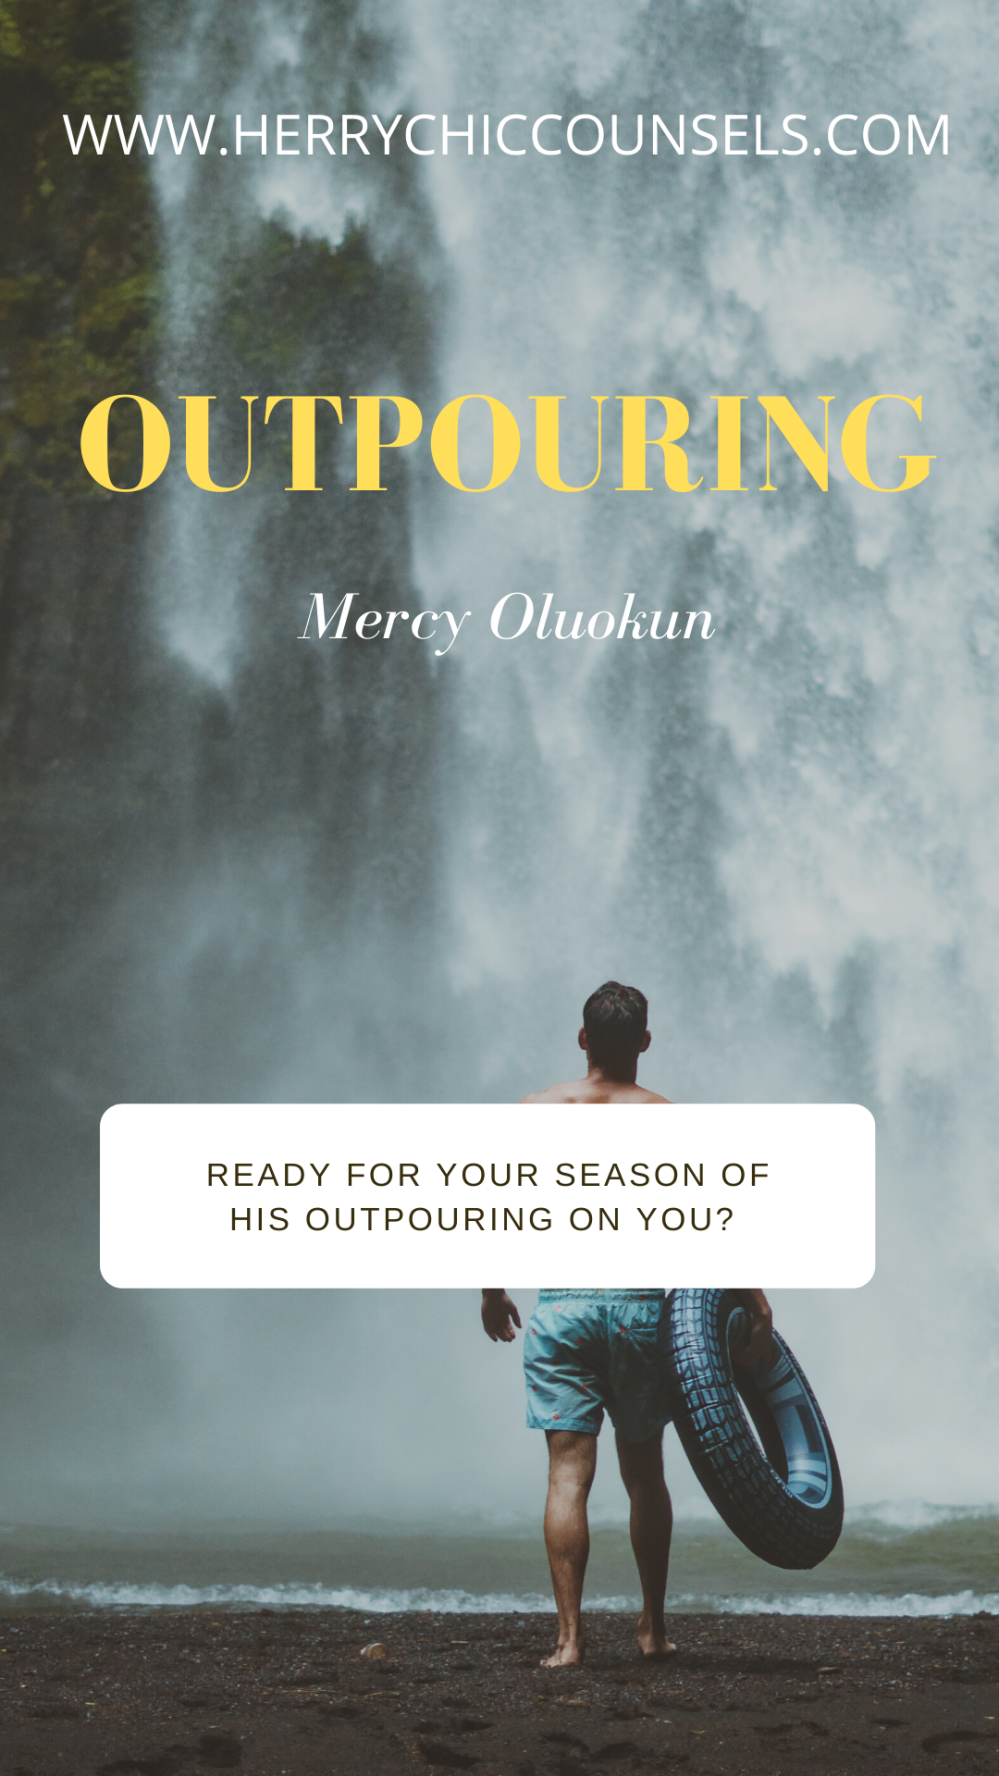 Outpouring - Fountain - look up